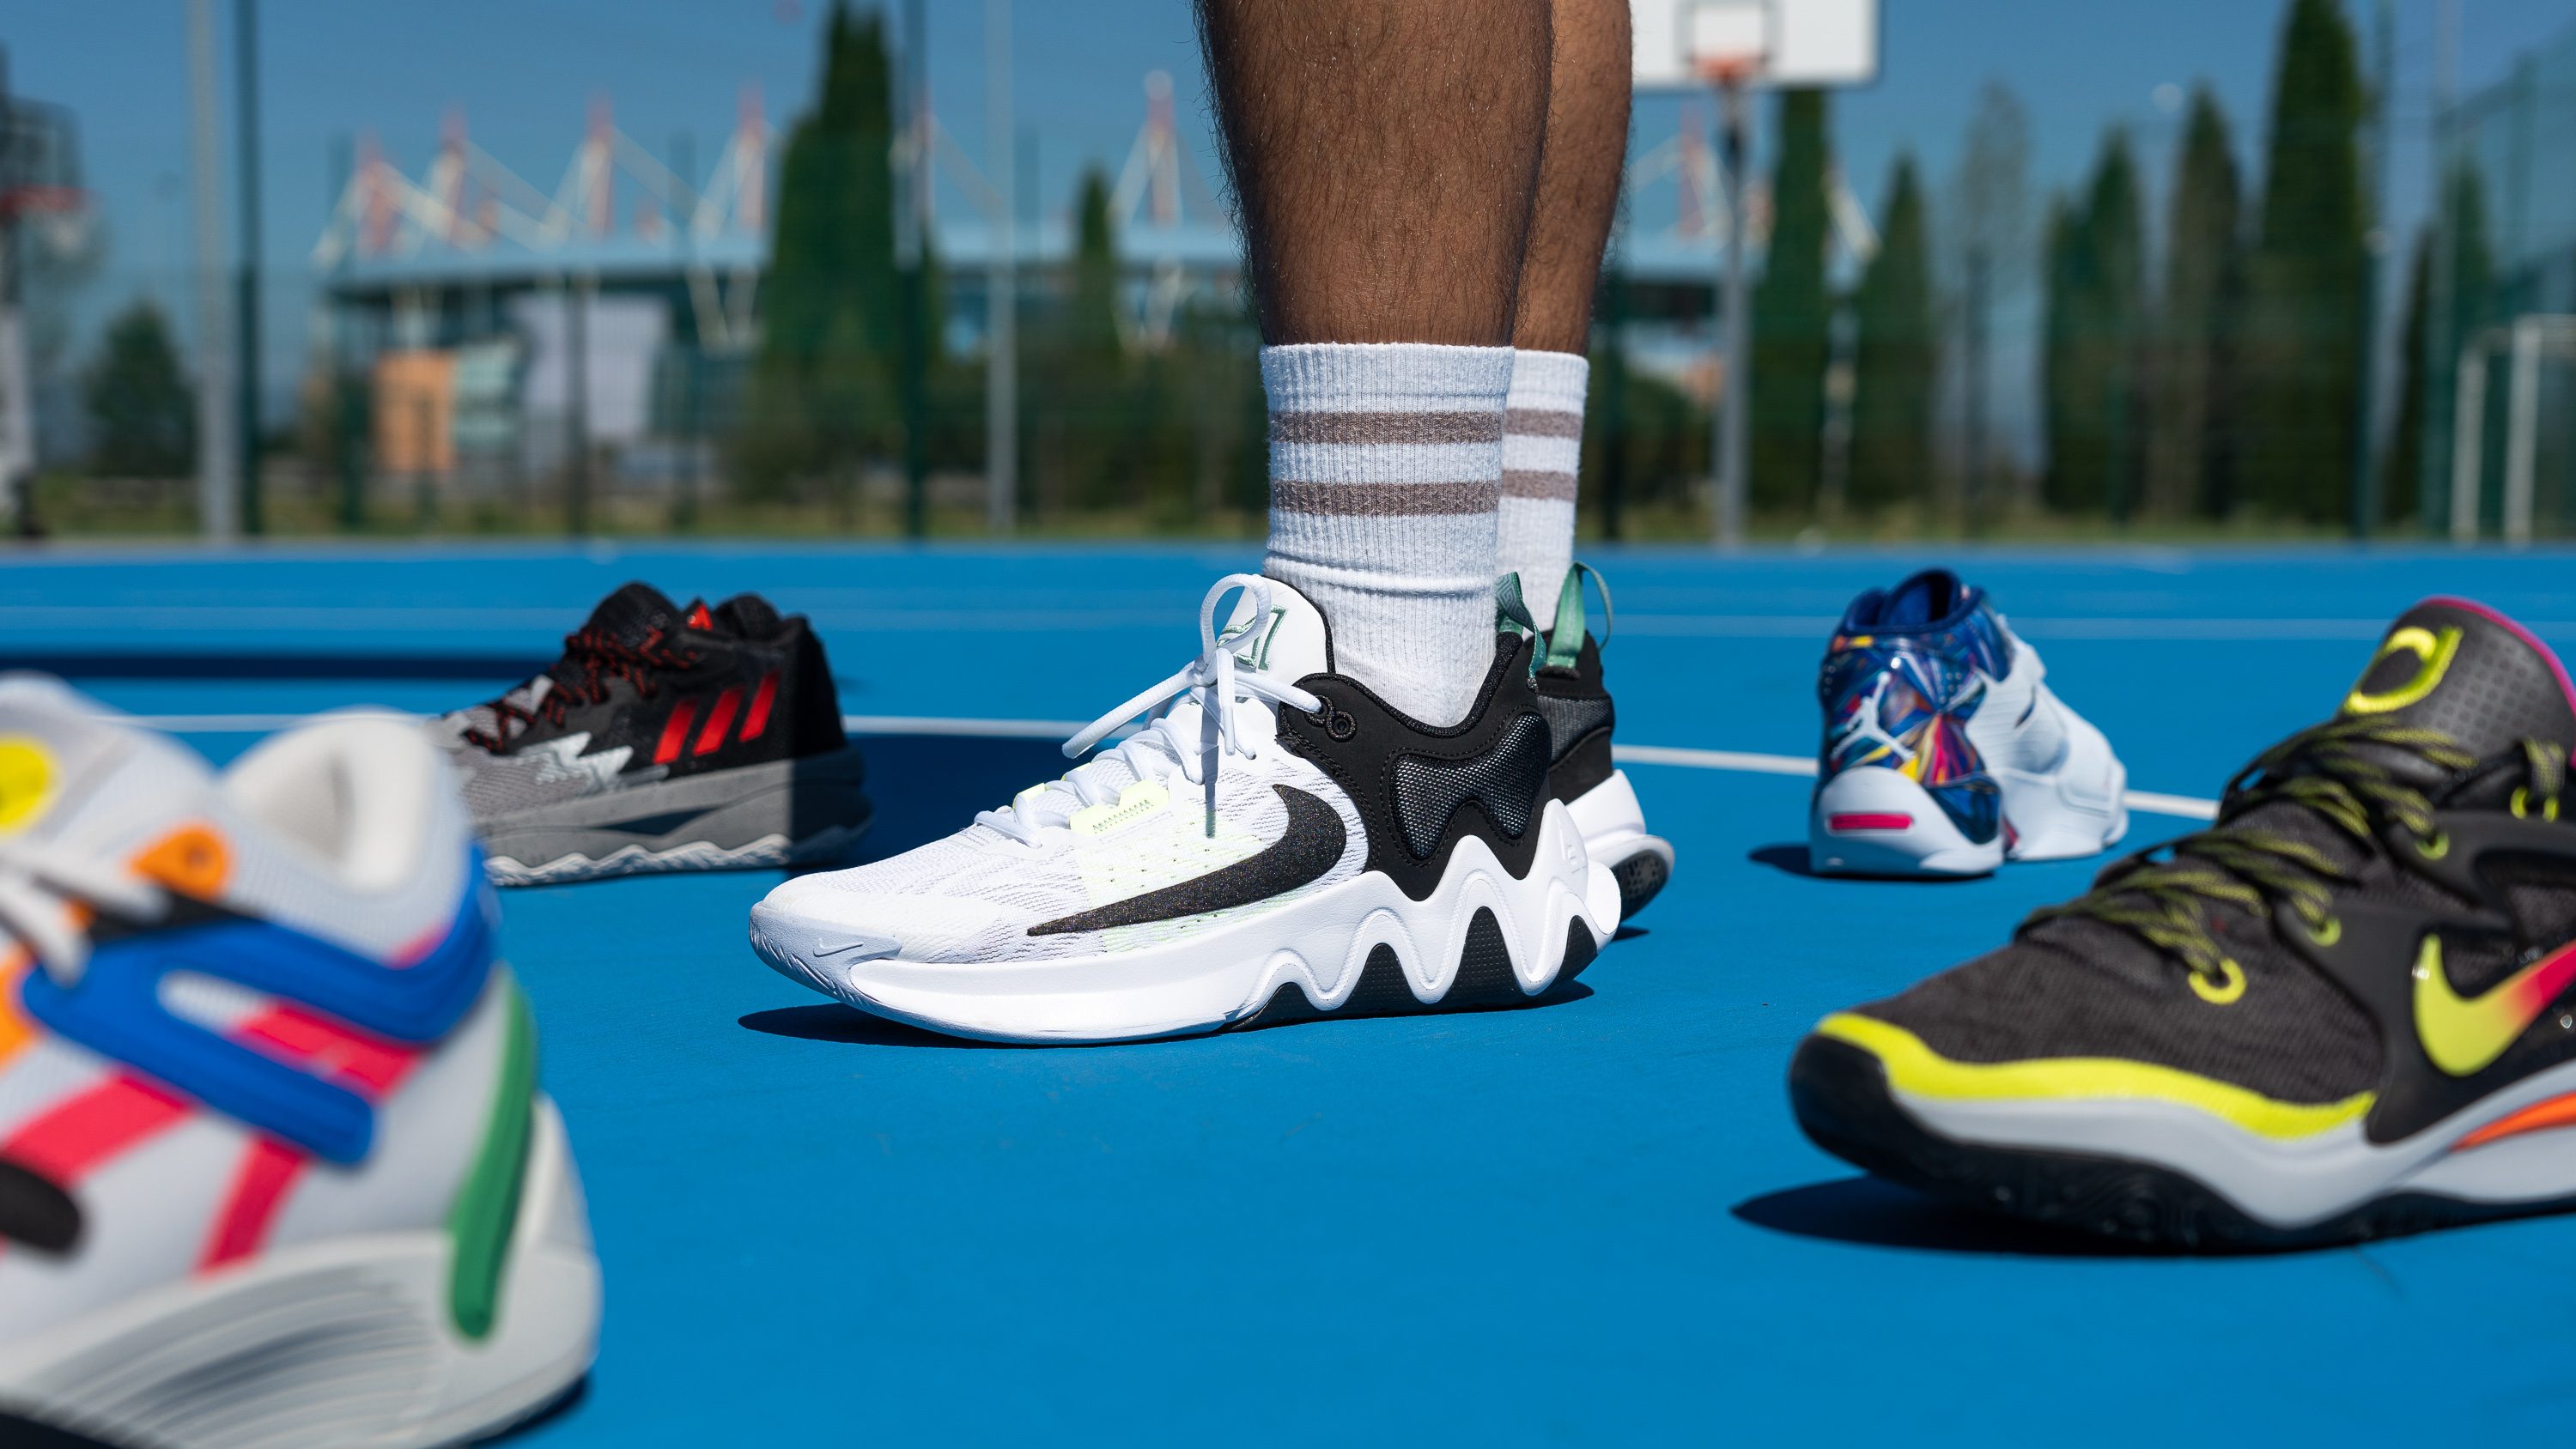 7 Best Basketball Shoes